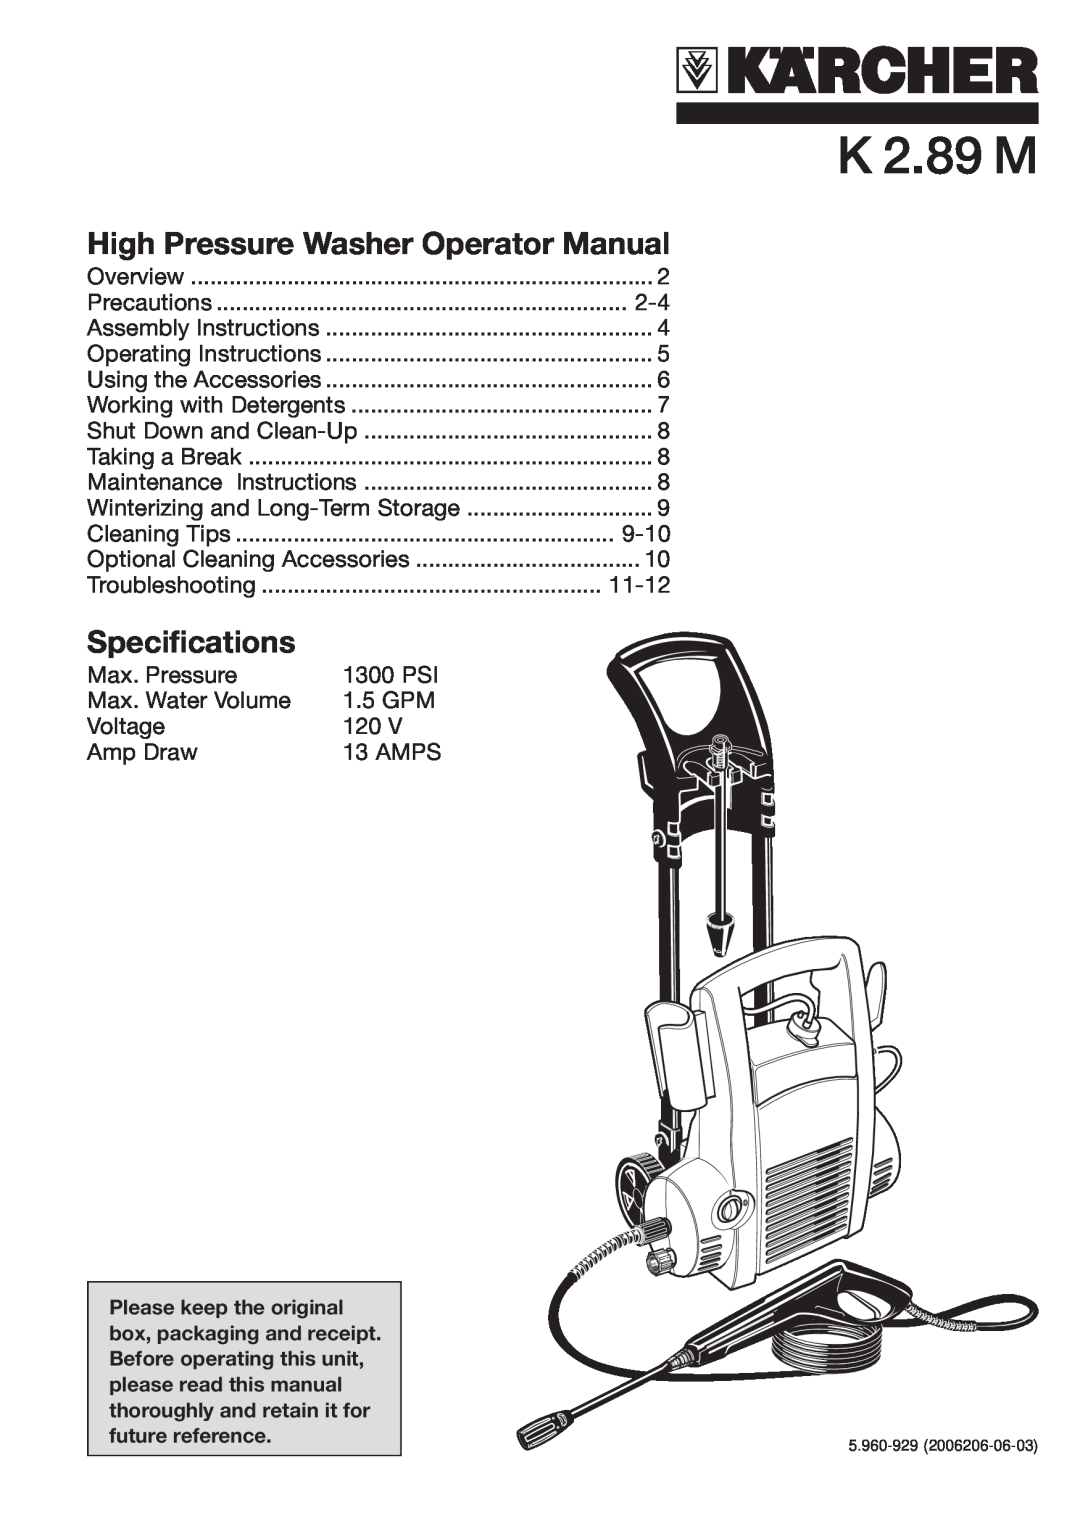 Karcher K 2.89 M specifications High Pressure Washer Operator Manual, Specifications 